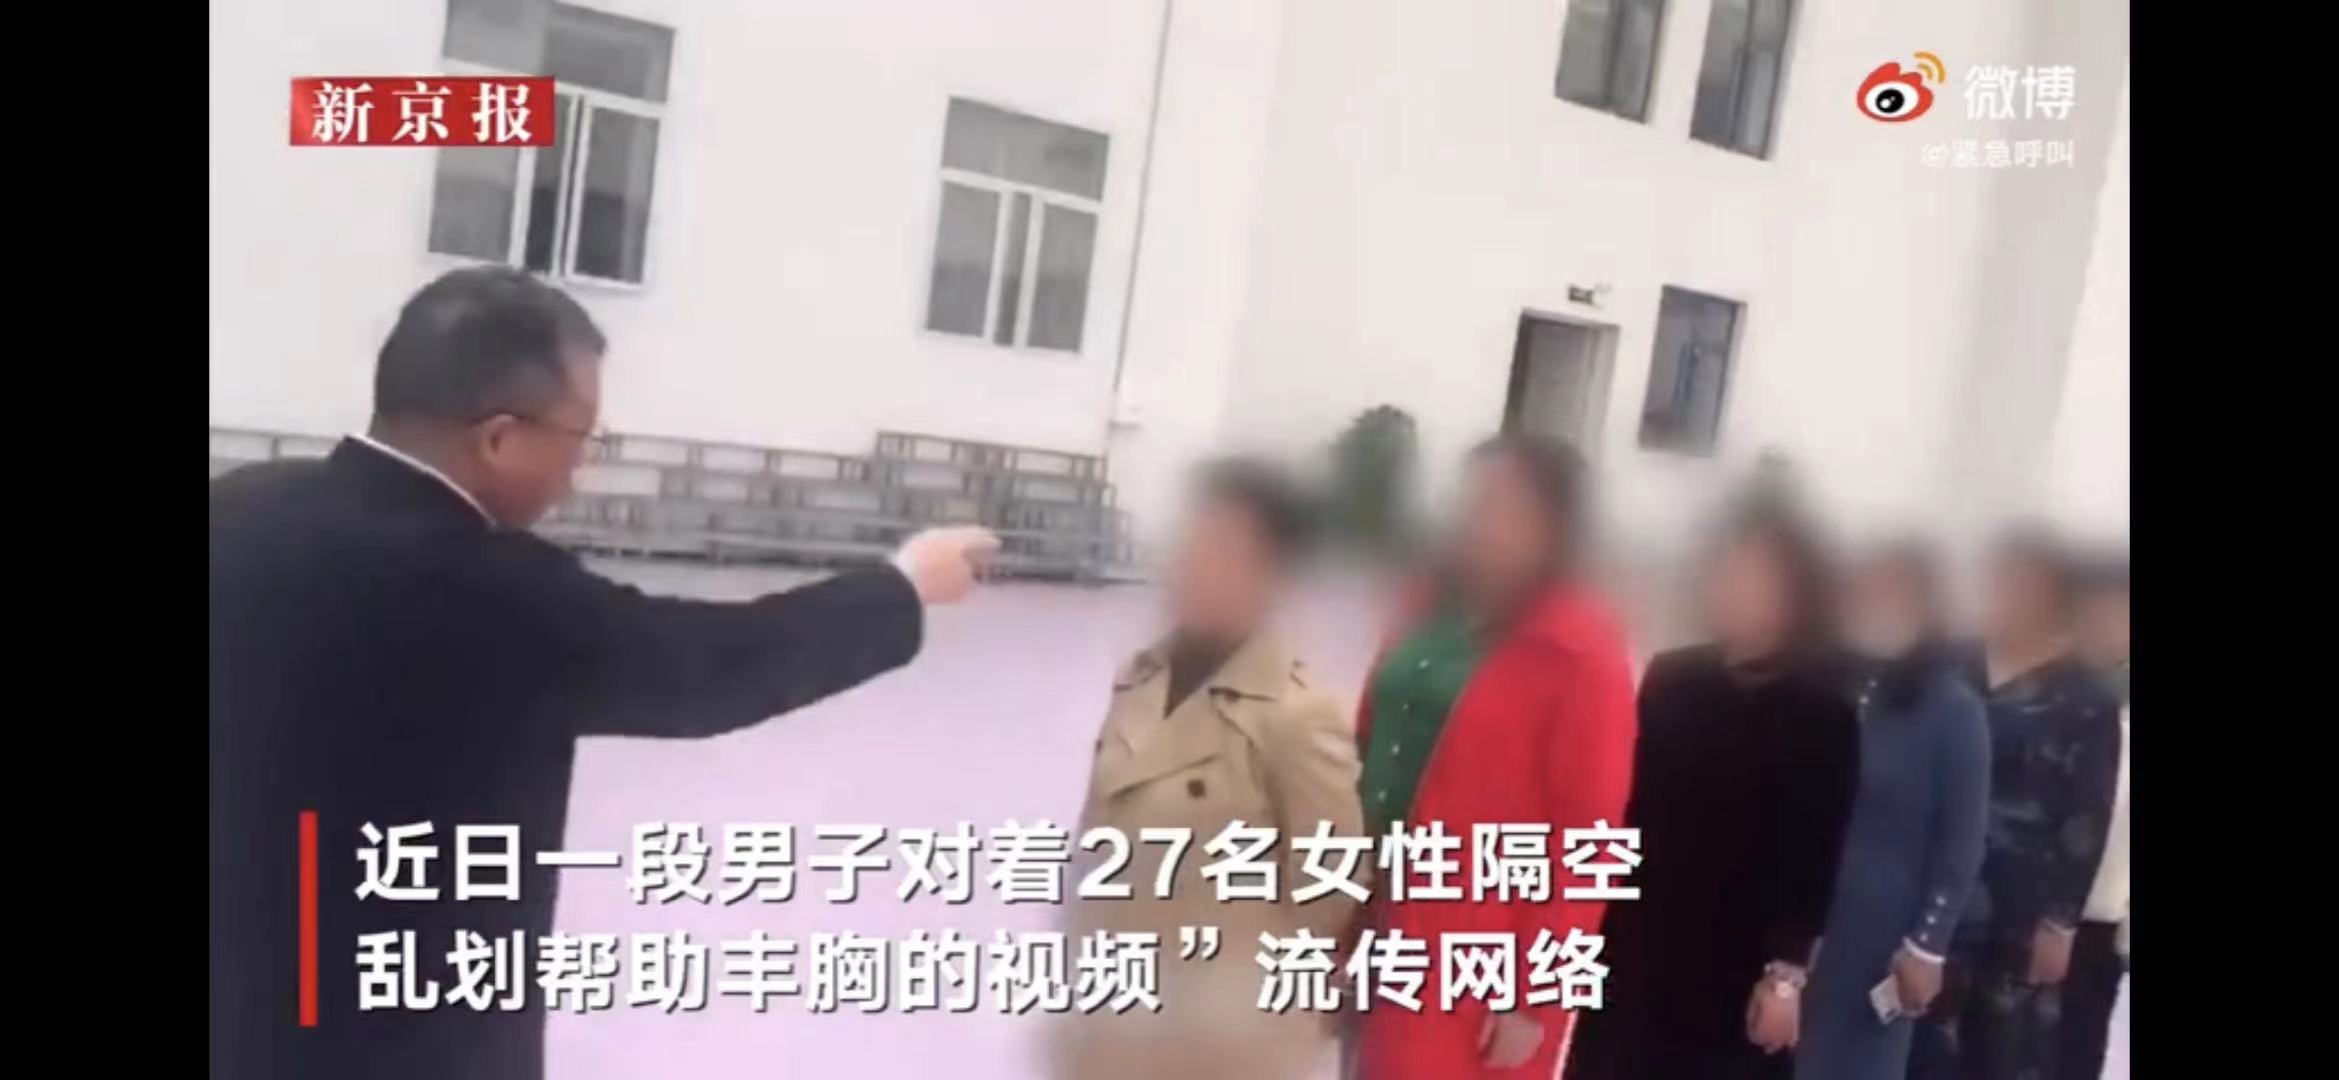 Photo: screenshot from a video by  the Beijing News